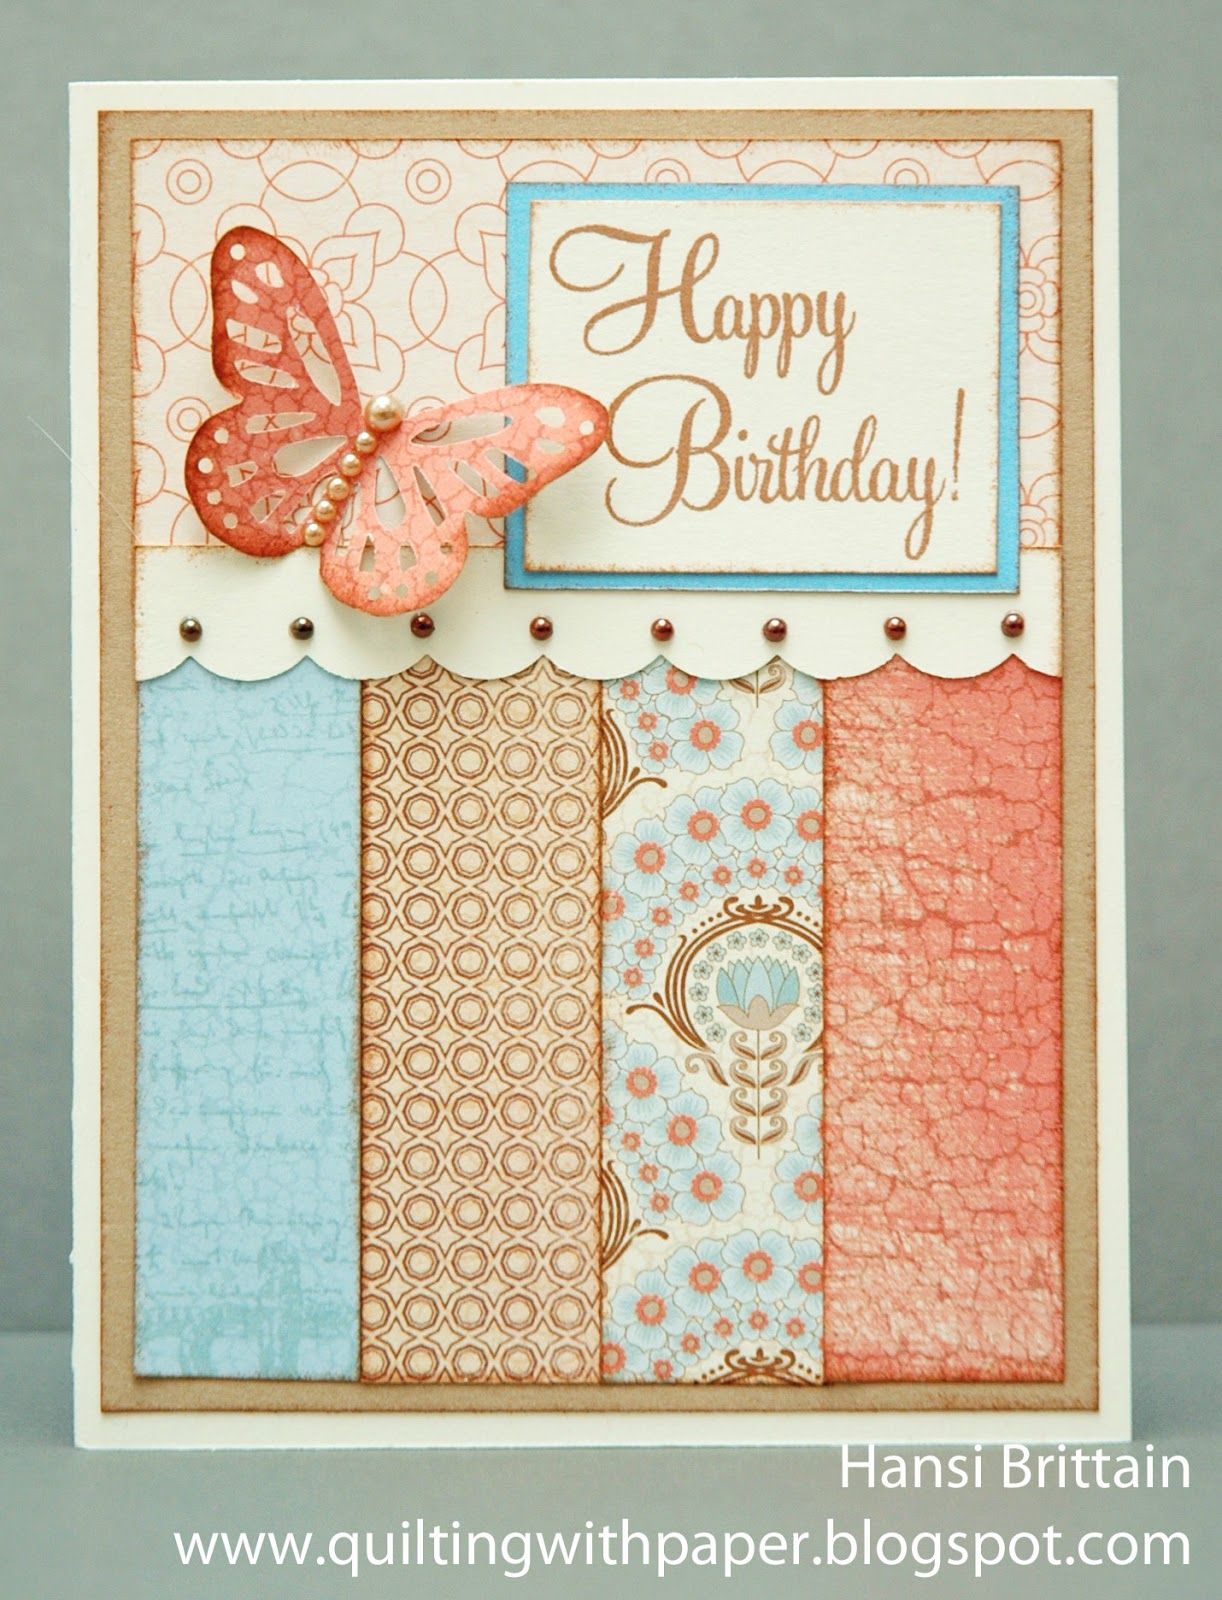 Quilting With Paper: A Masculine and Feminine Birthday Card Using ...